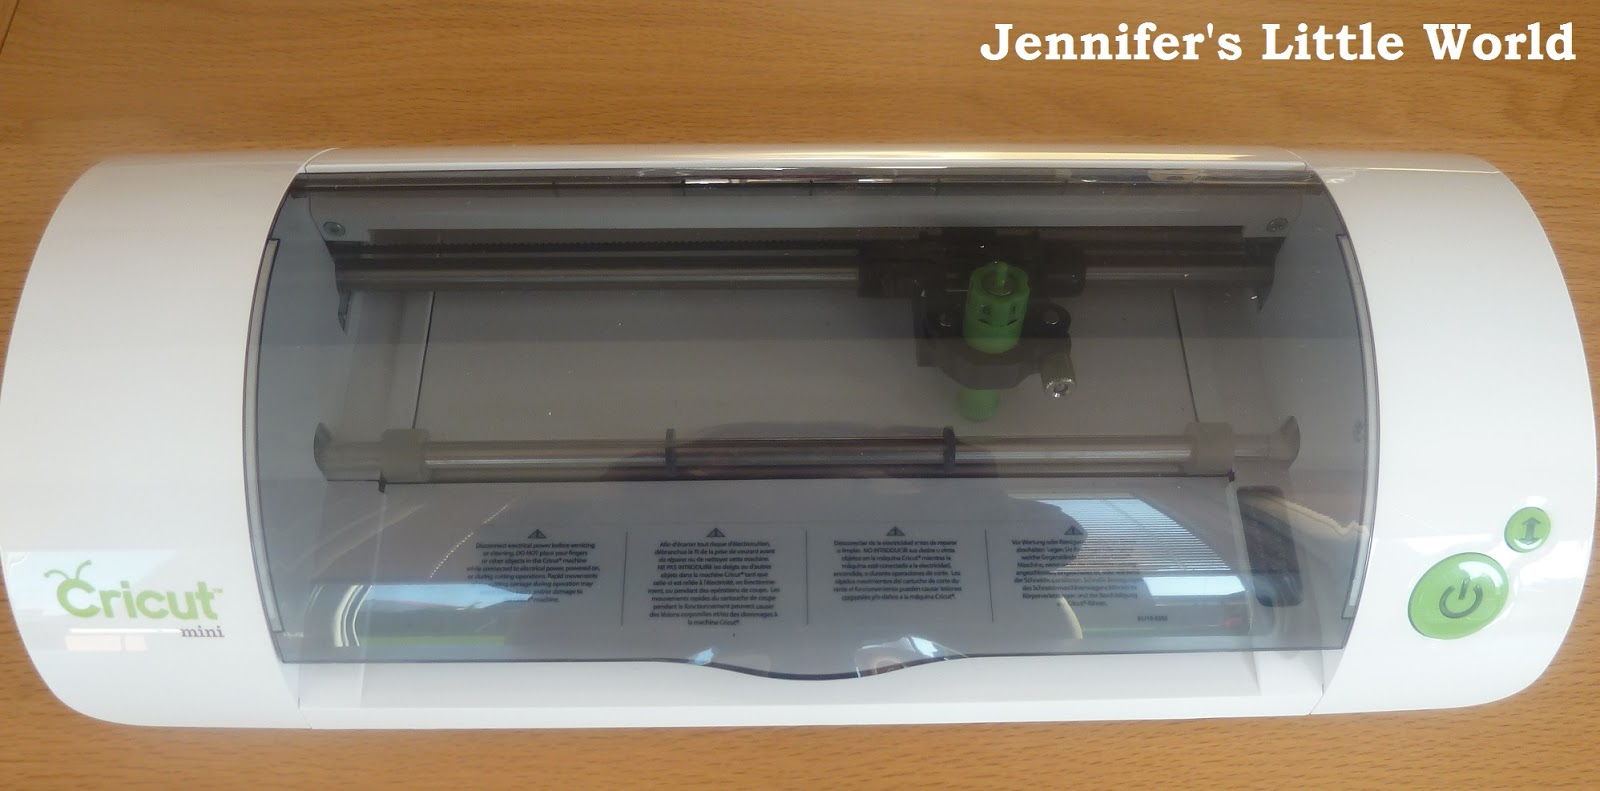 Cricut Mini - Personal Electronic Cutter Review And Giveaway - Kim